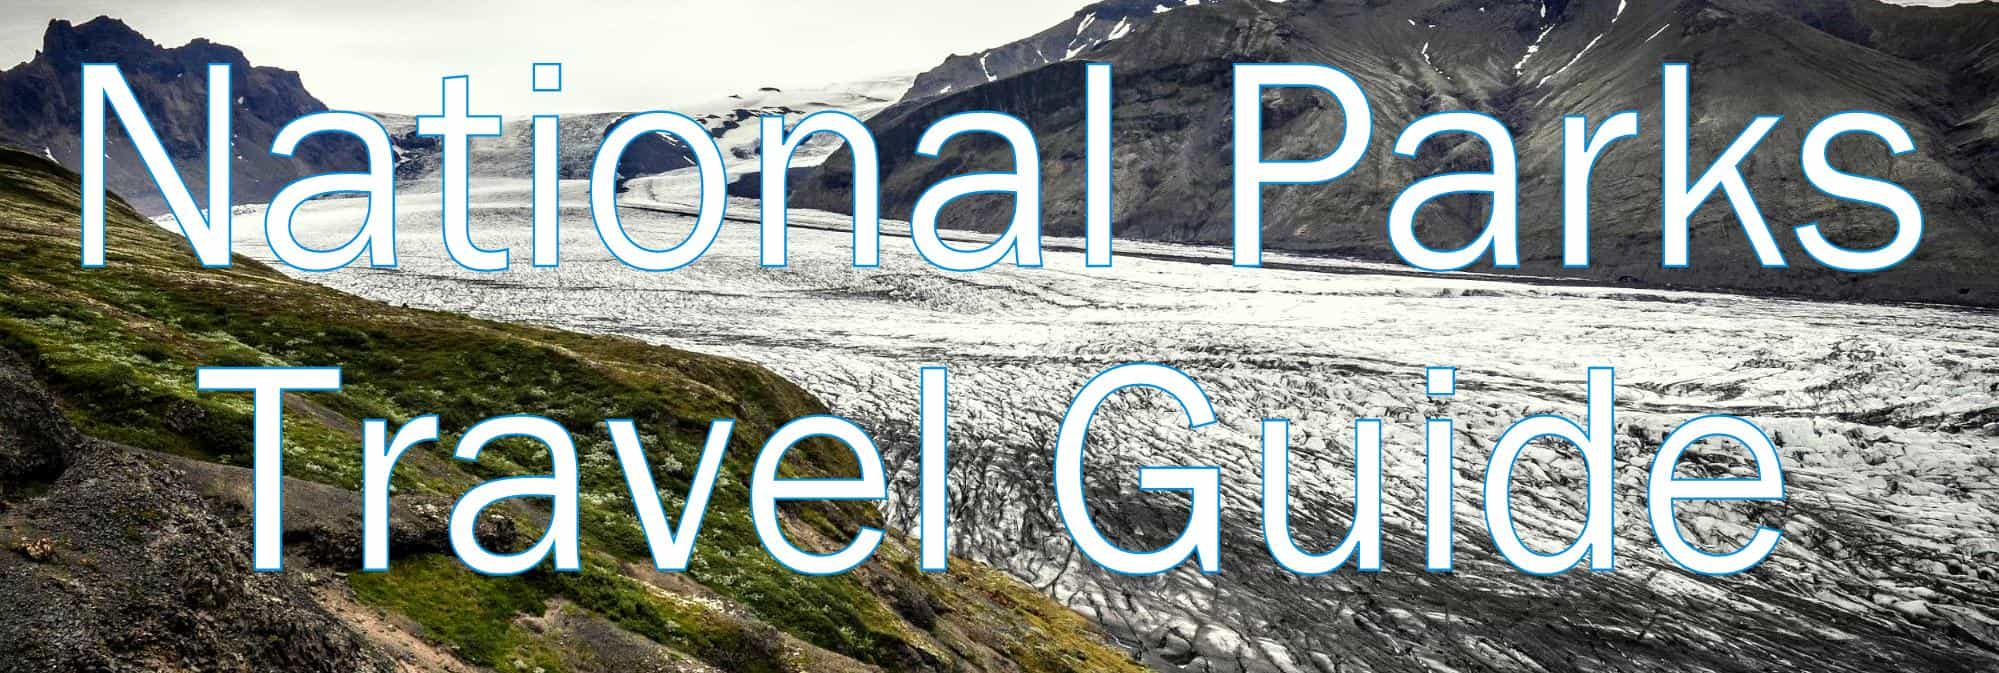 National Parks Travel guide